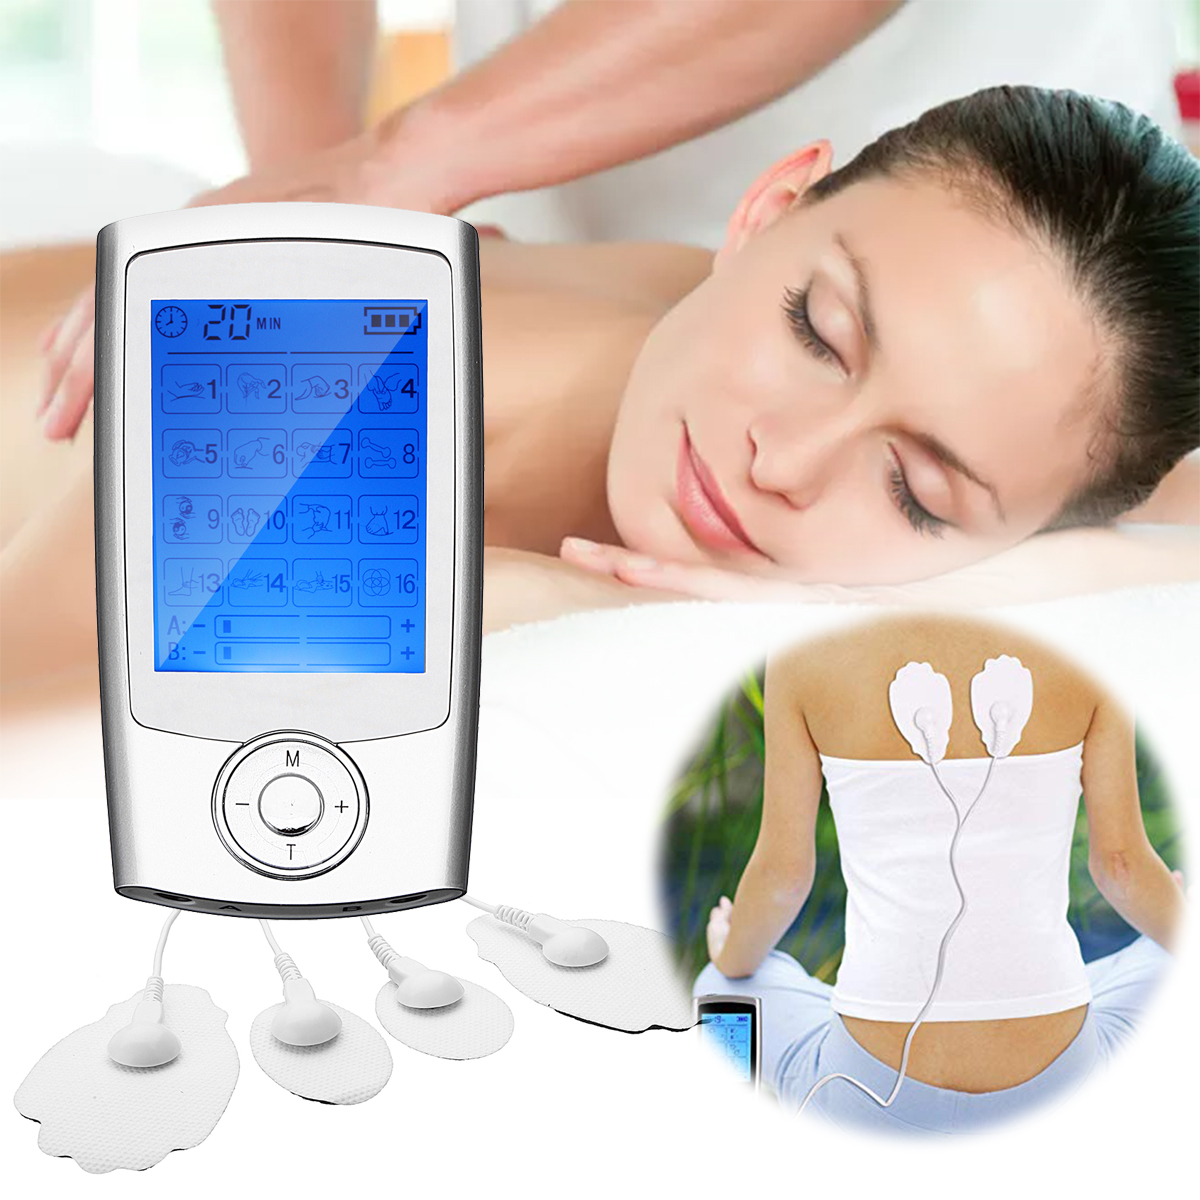 16-Modes-Tens-Unit-with-4-Pads-Pulse-Impulse-Pain-Relief-Machine-Electric-Massager-Muscle-Stimulator-1402466